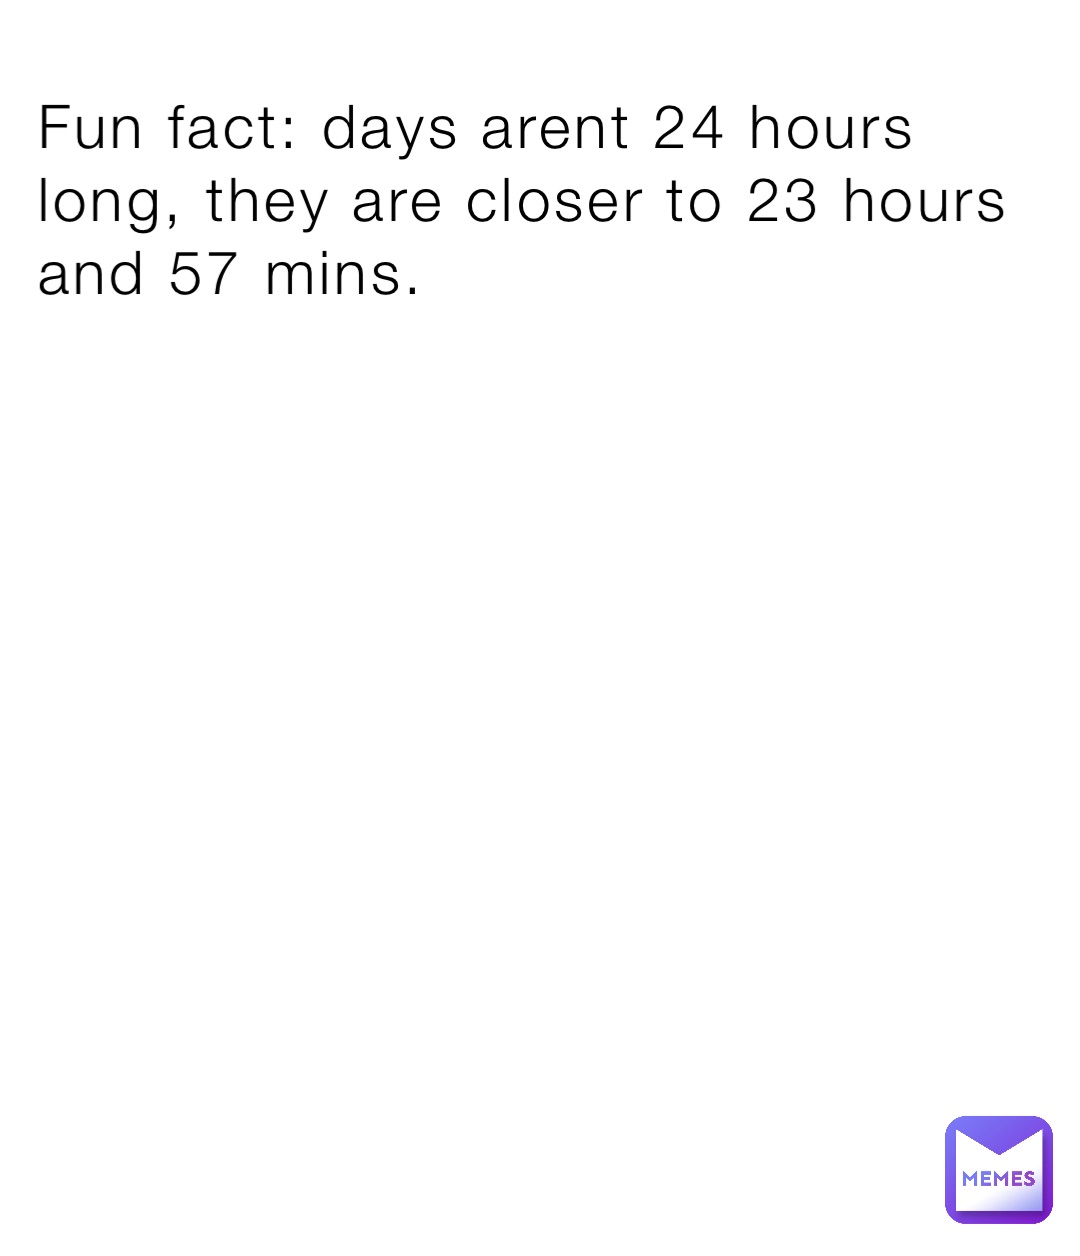 Fun fact: days arent 24 hours long, they are closer to 23 hours and 57 mins.